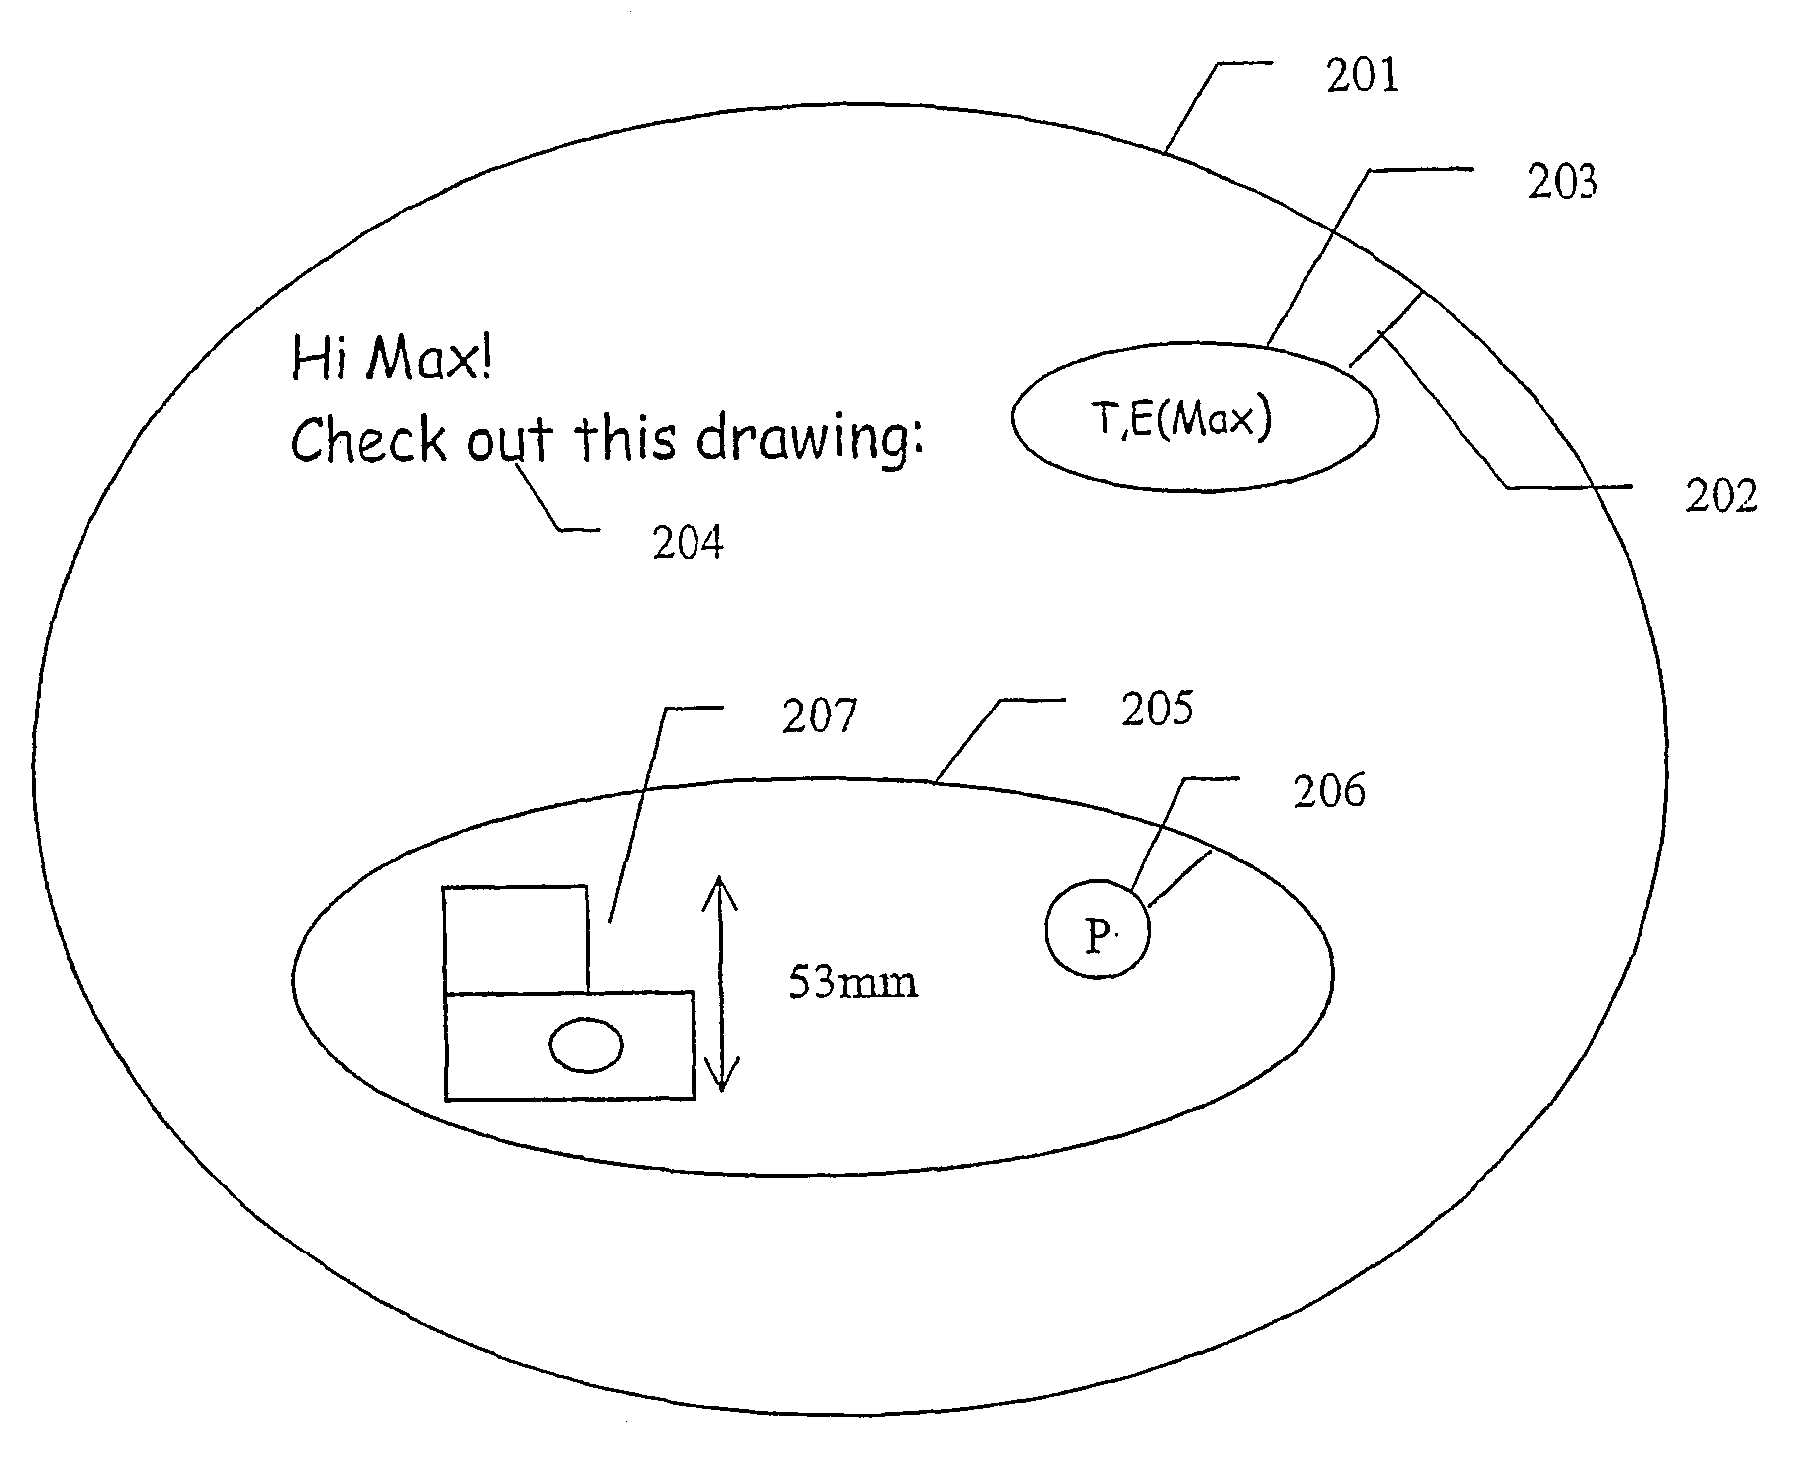 Method and arrangement for identifying and processing commands in digital images, where the user marks the command, for example by encircling it